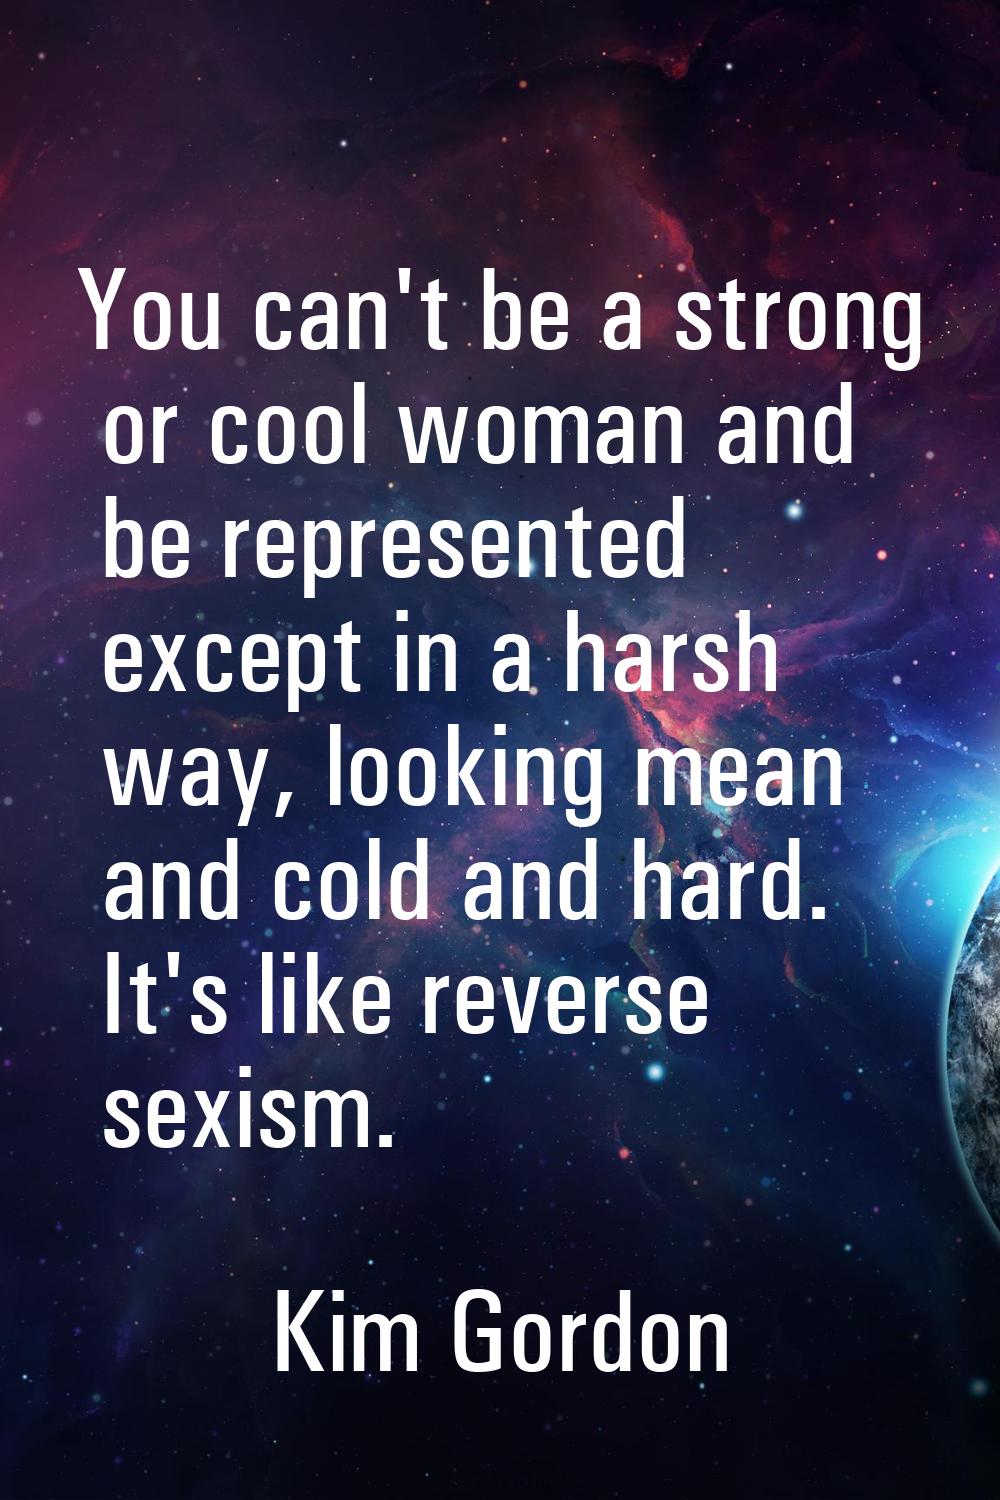 You can't be a strong or cool woman and be represented except in a harsh way, looking mean and cold